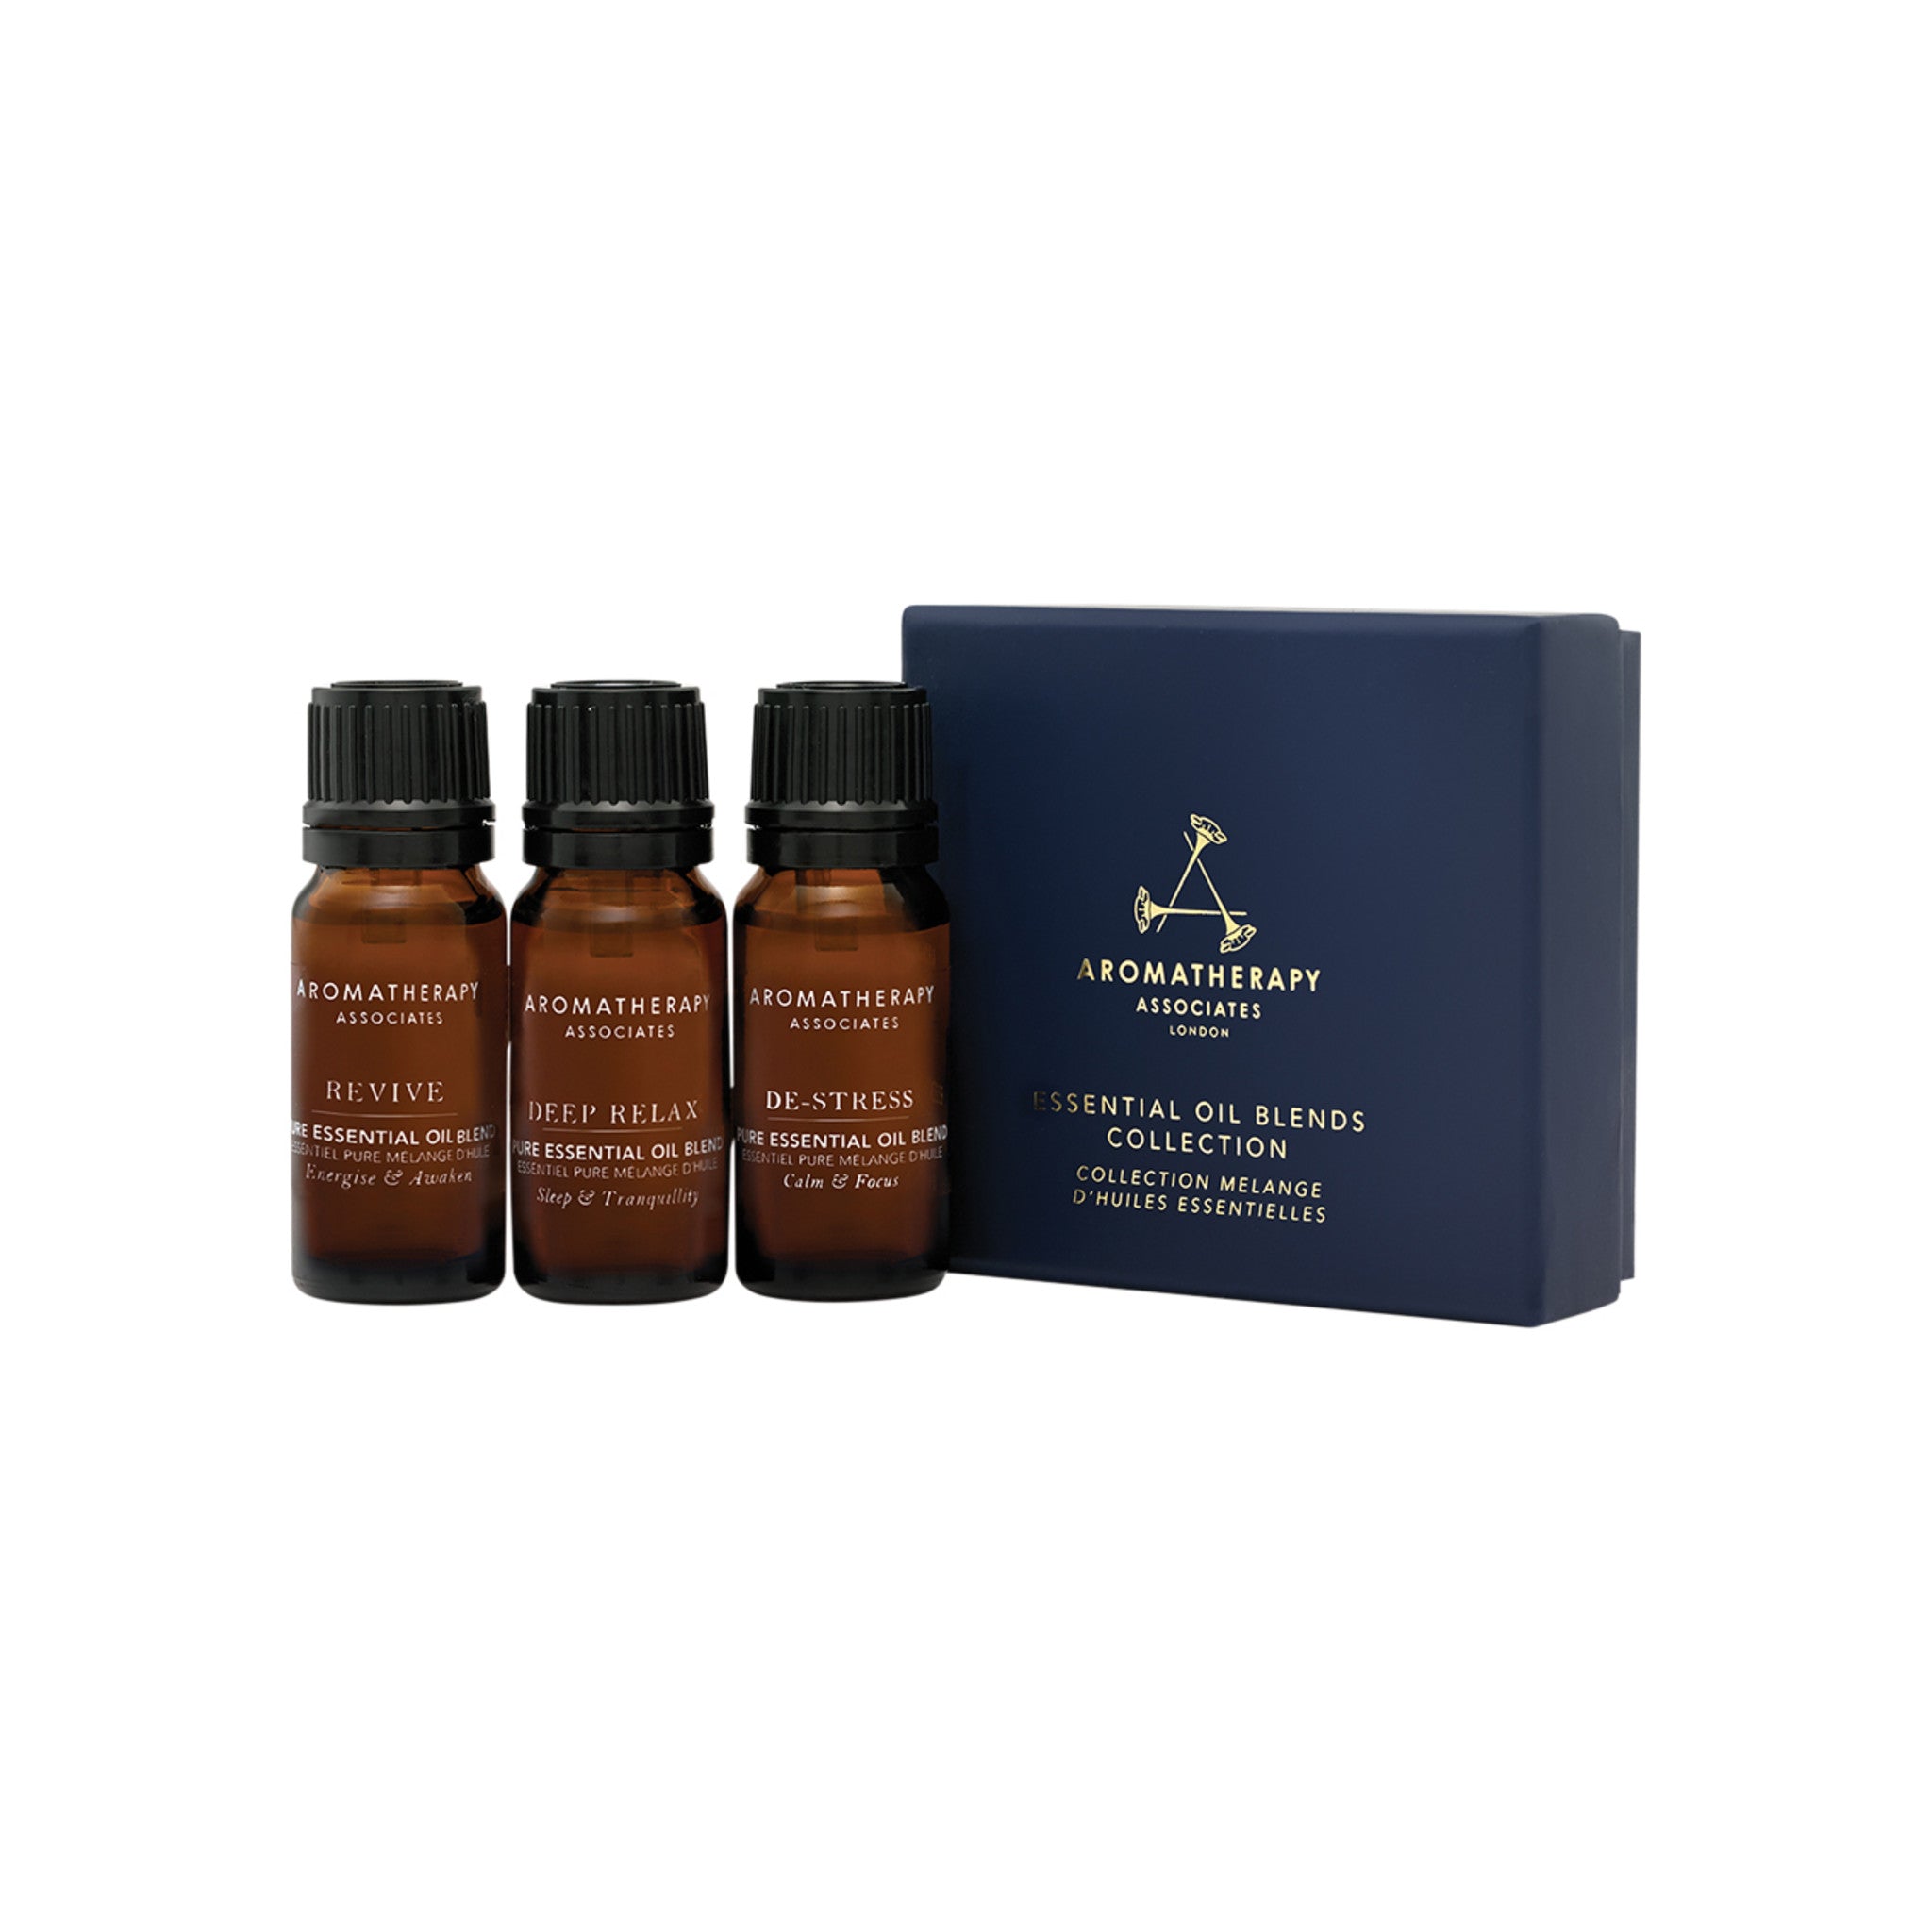 Aromatherapy Associates Essential Oil Blends Collection main image.